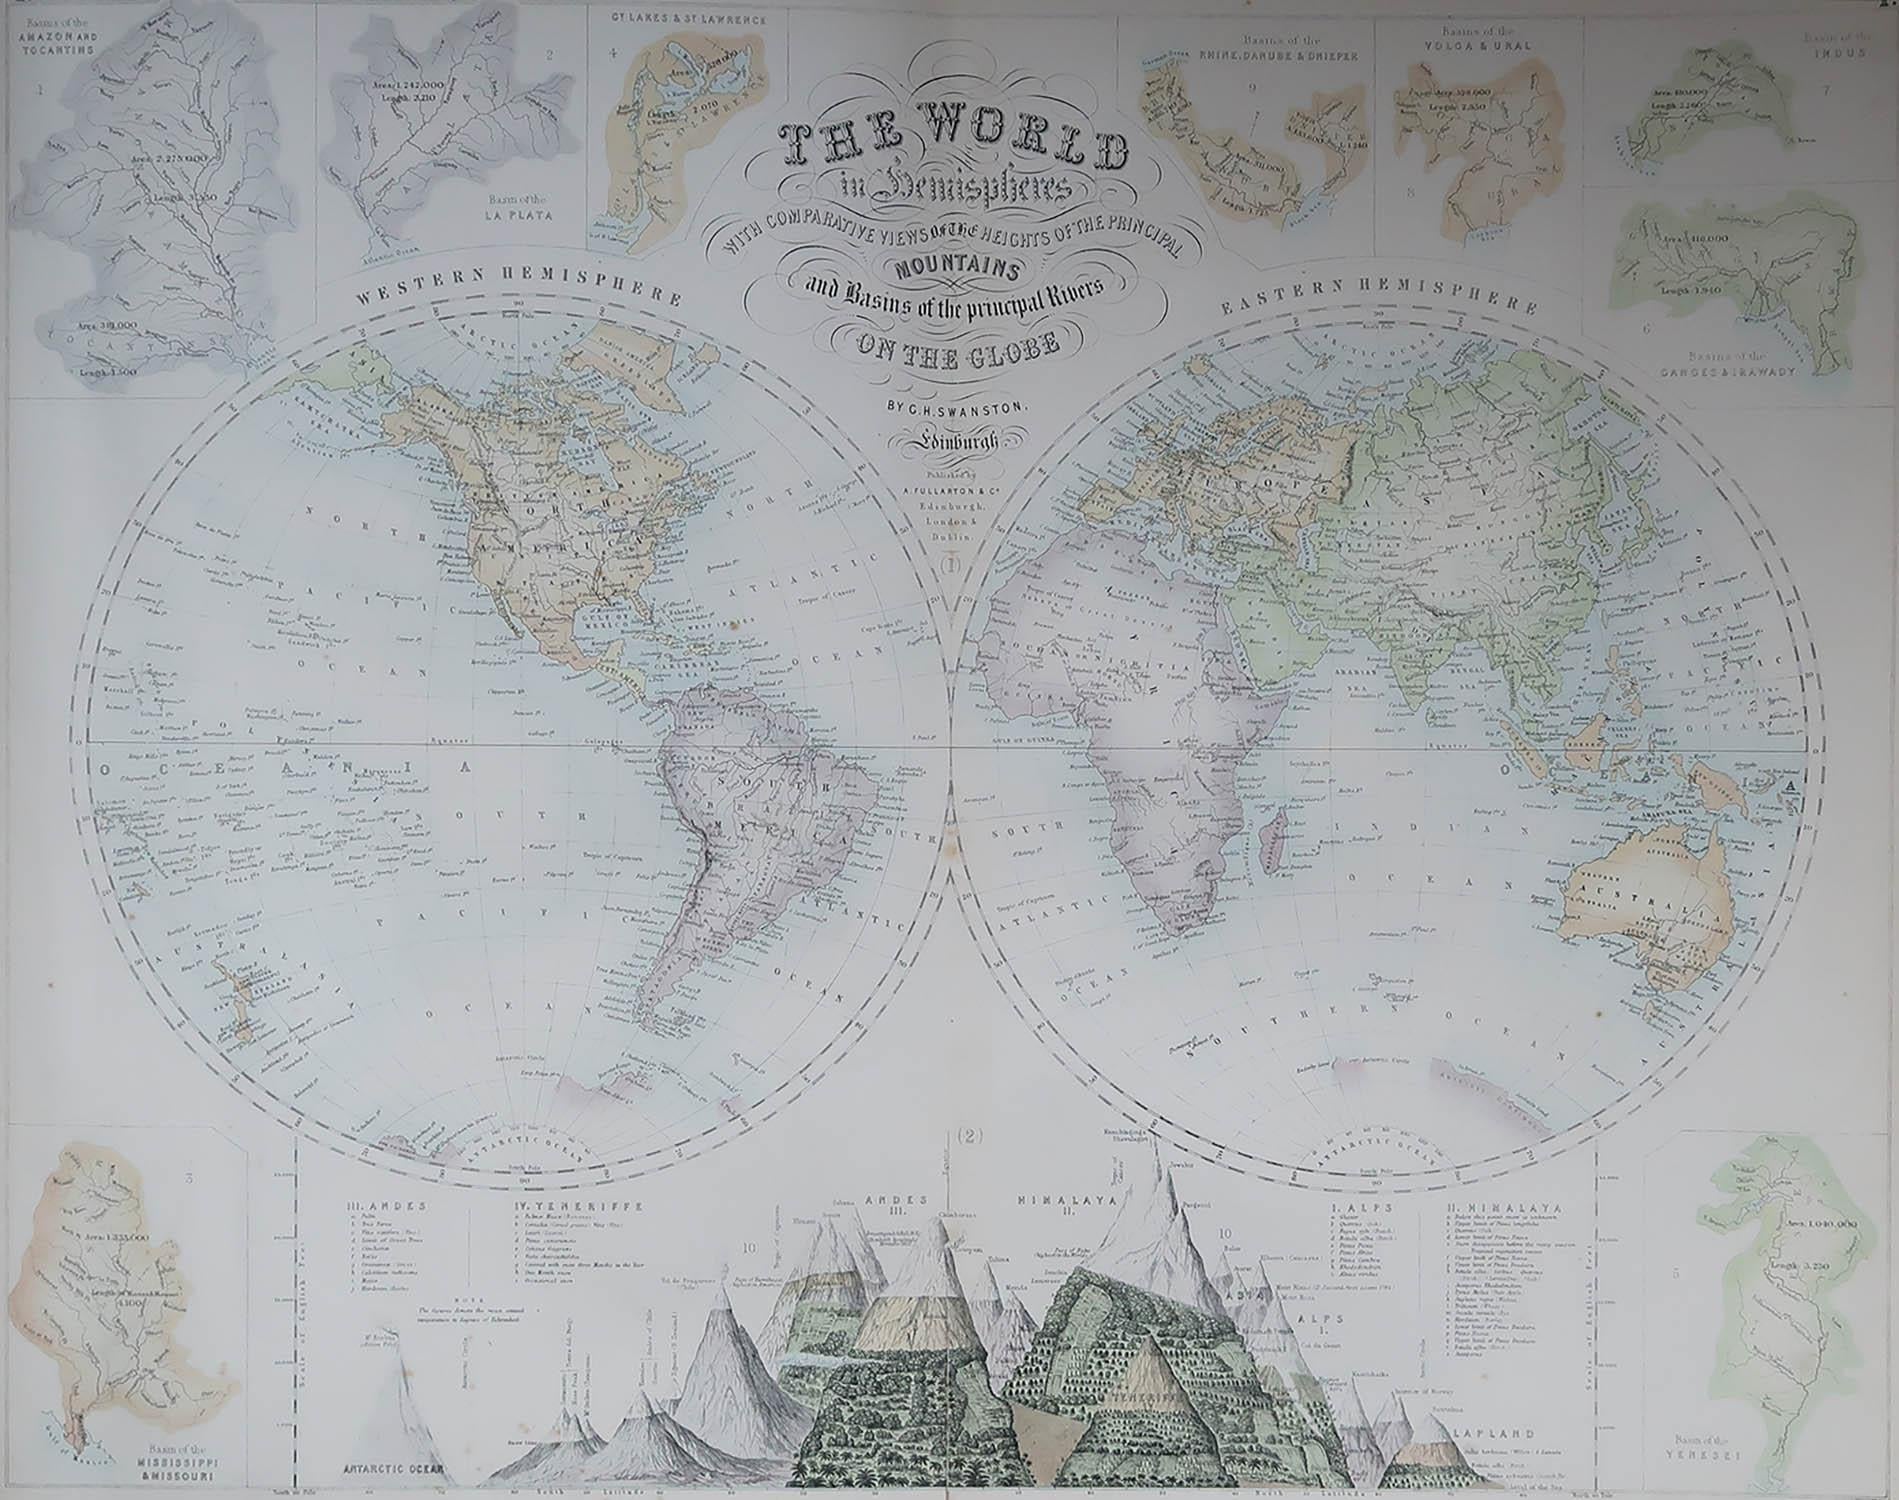 Great map of the World. Showing both hemispheres

From the celebrated Royal Illustrated Atlas

Lithograph. Original color. 

Published by Fullarton, Edinburgh, C.1870

Unframed.

Repair to a split in the bottom part of the central fold. Seen in last